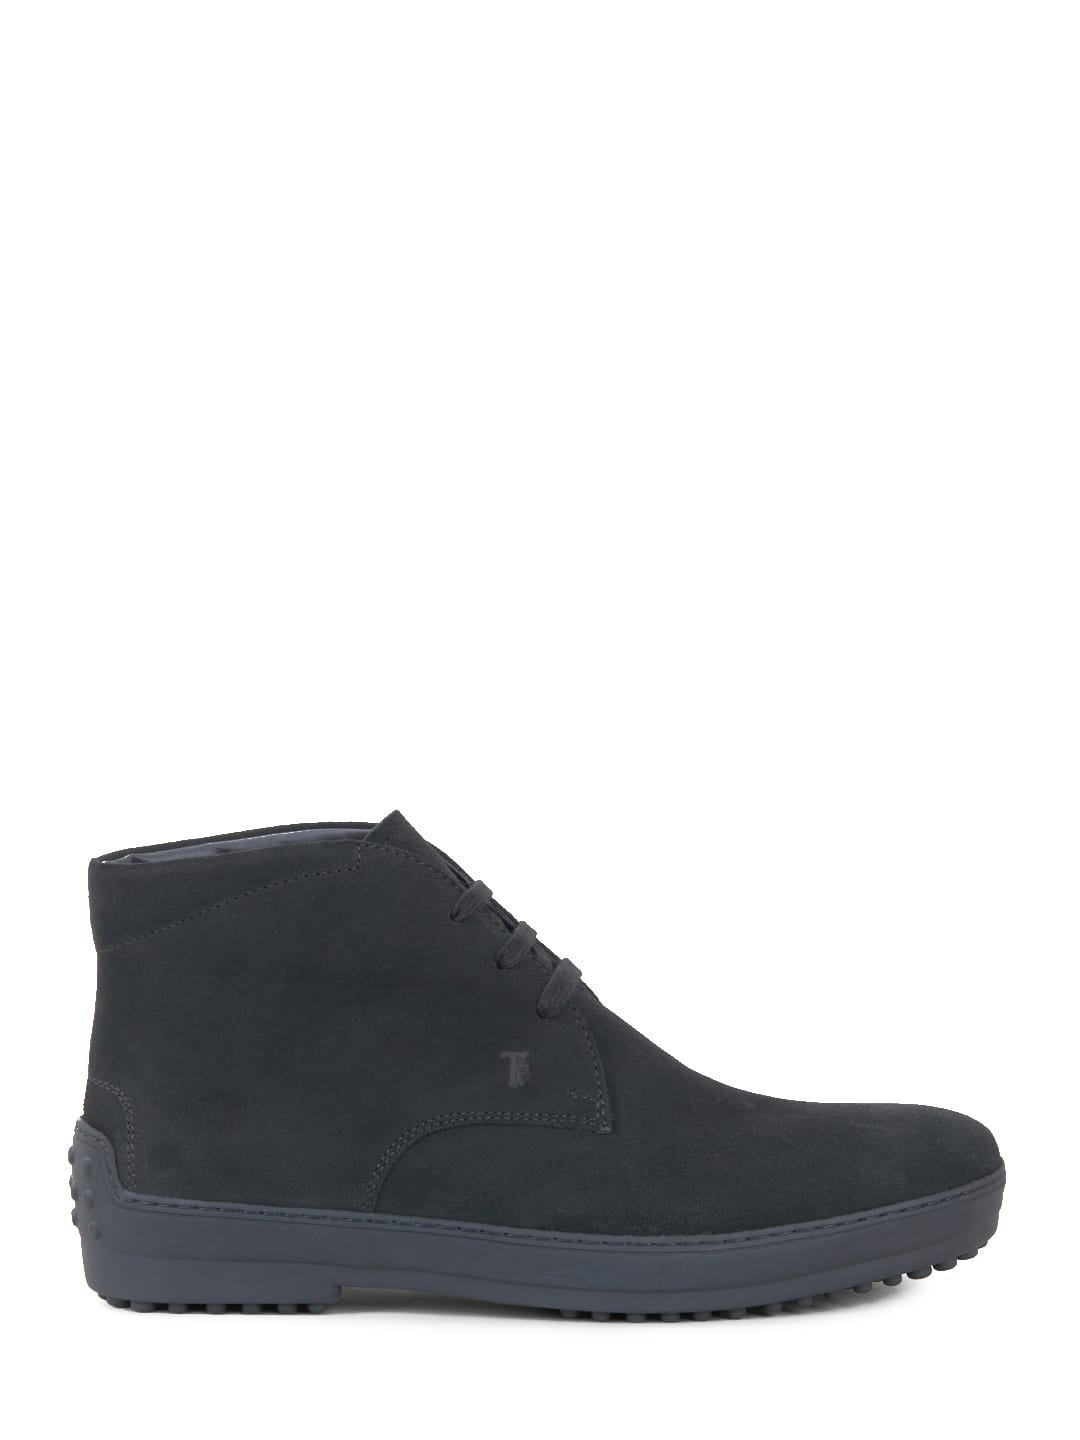 Tods Winter Ankle Boot Black